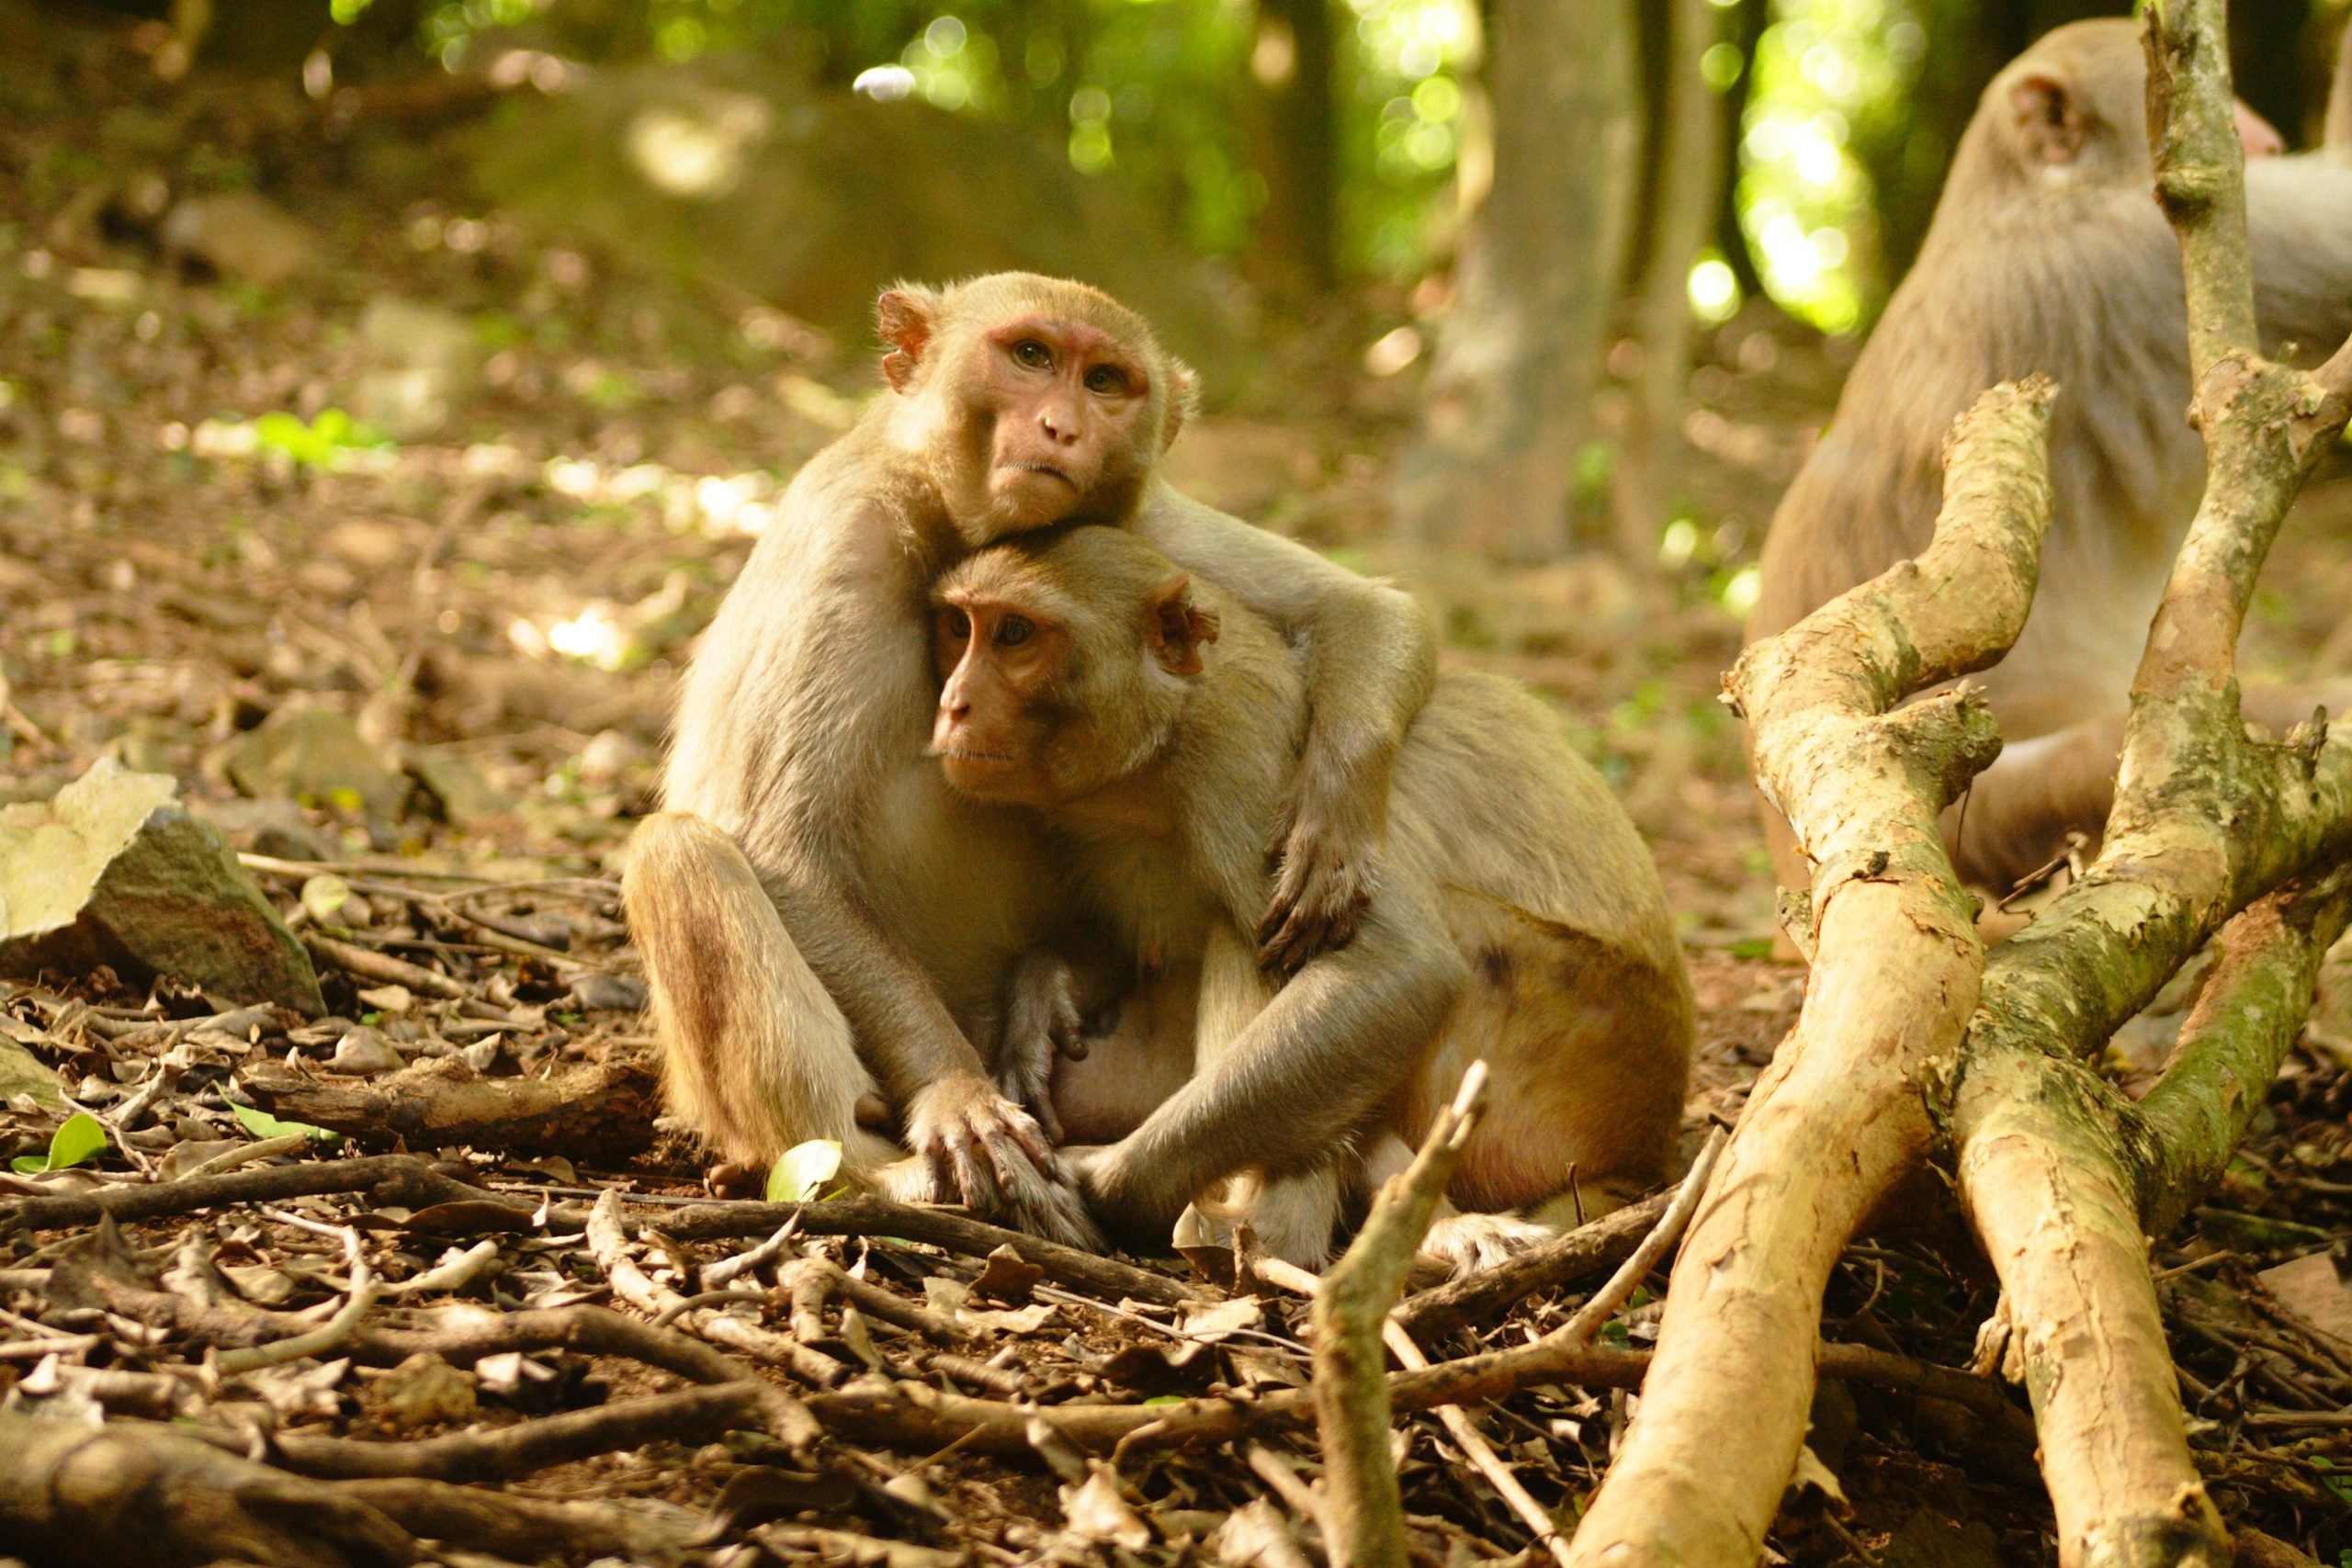 Climate Catastrophe Forces Island Monkeys to Quickly Master New Social Skills [Video]